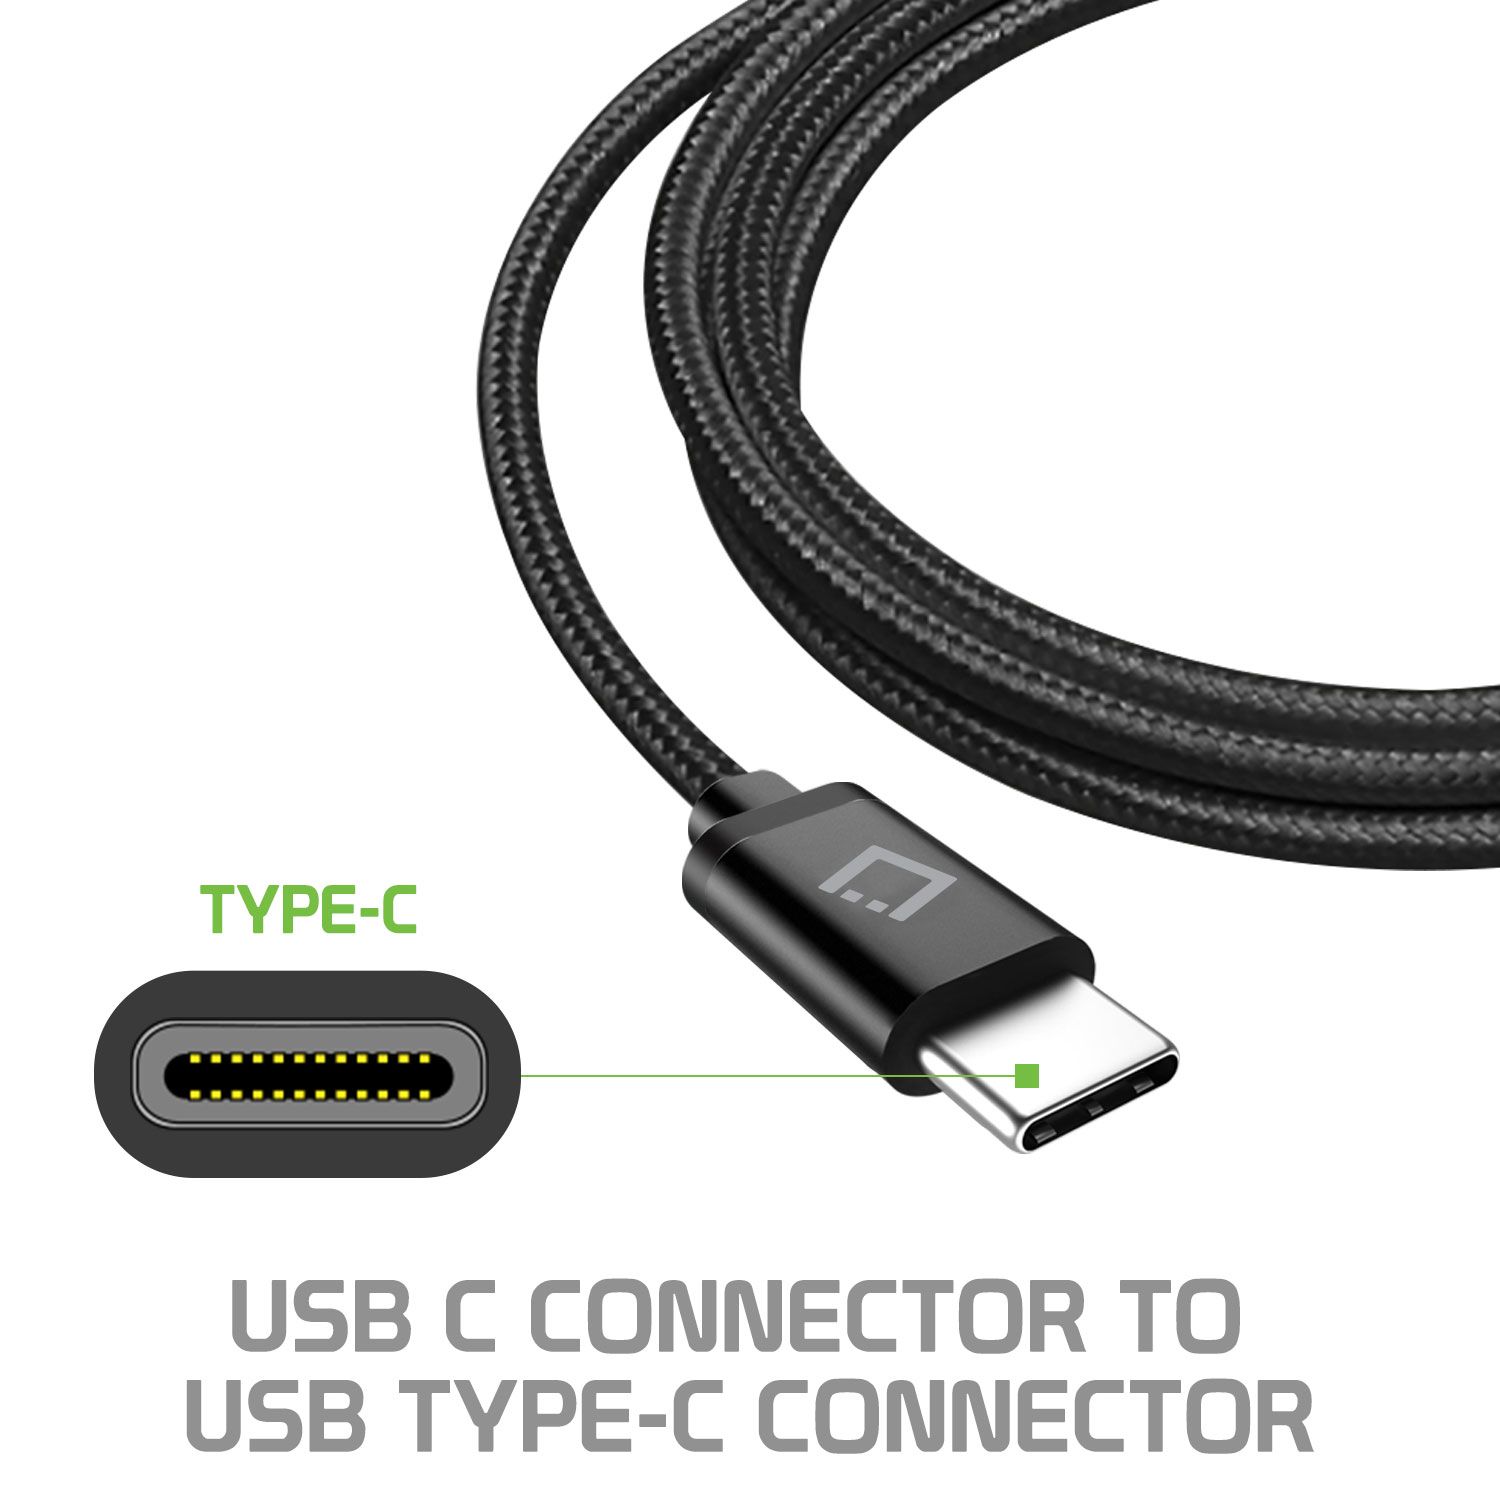 Cellet USB-C to USB-C Cable Compatible with Samsung Galaxy S20, S20+ Plus, S20 Ultra, Heavy Duty Braided USB Type-C to Type-C Cable (6 feet/1.8 meters) and Atom Wipe - image 2 of 9